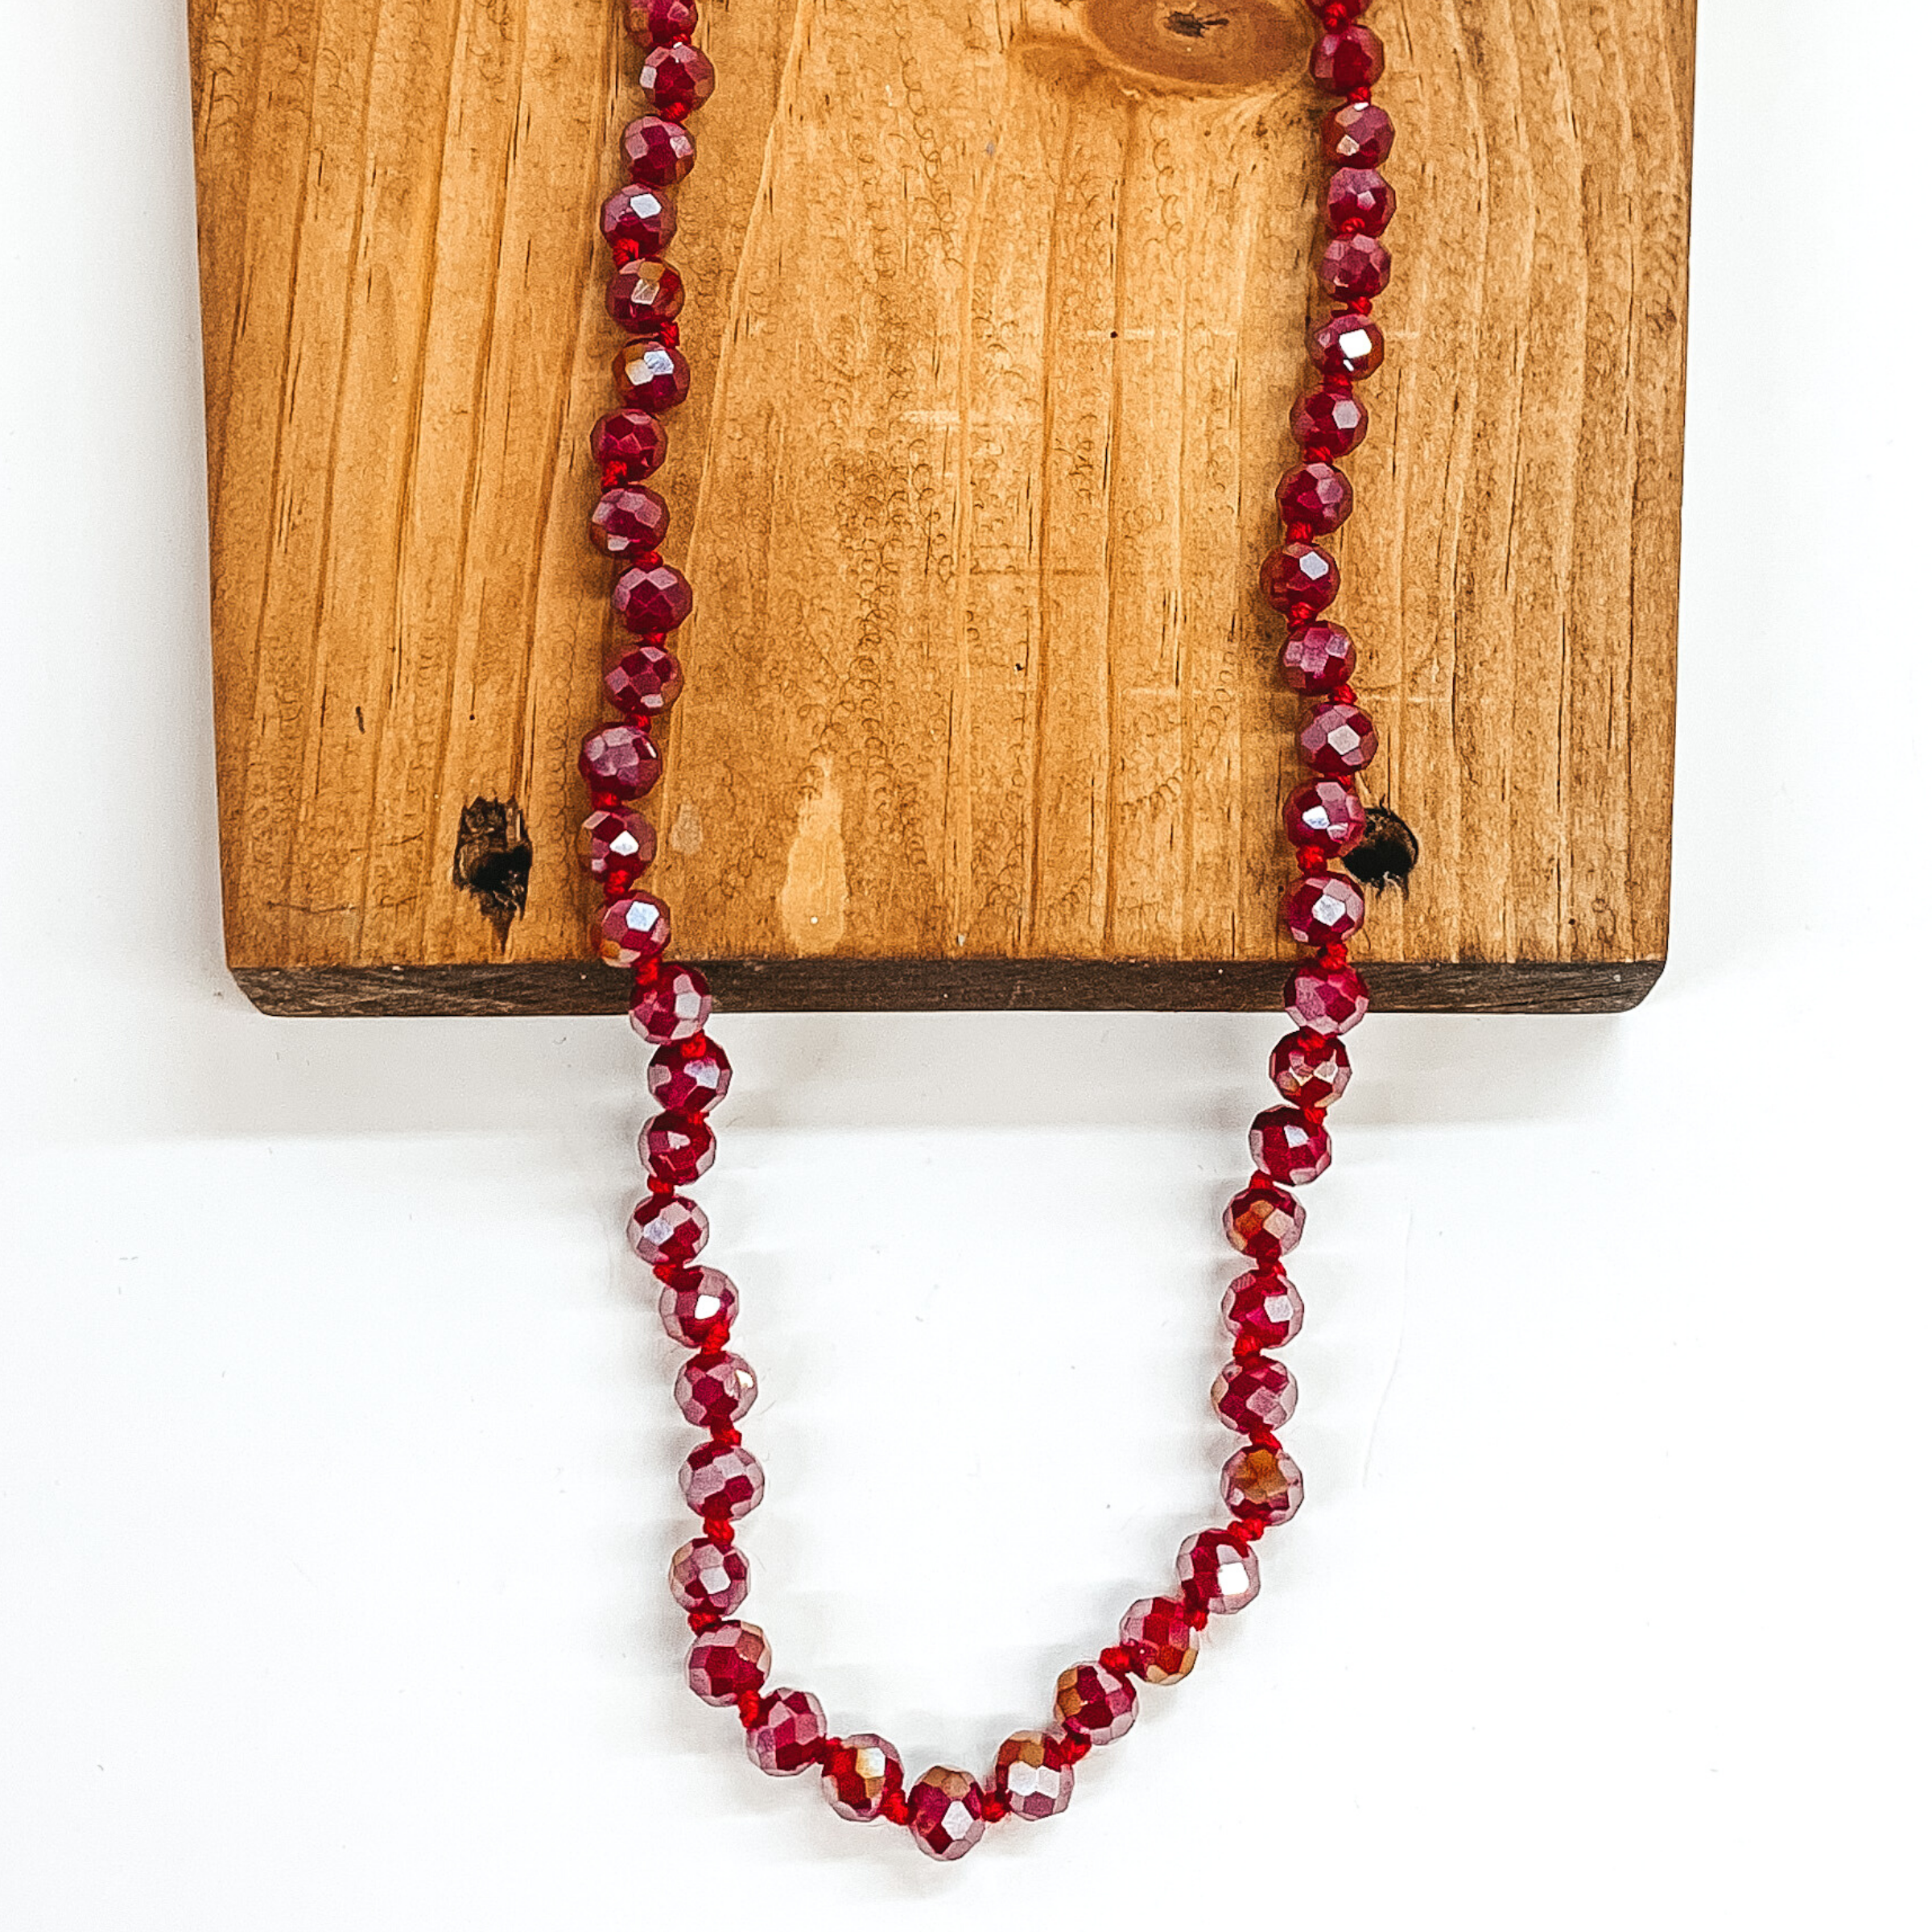 Red AB crystal beaded necklace. This necklace is laying on top of a brown block on a white background.